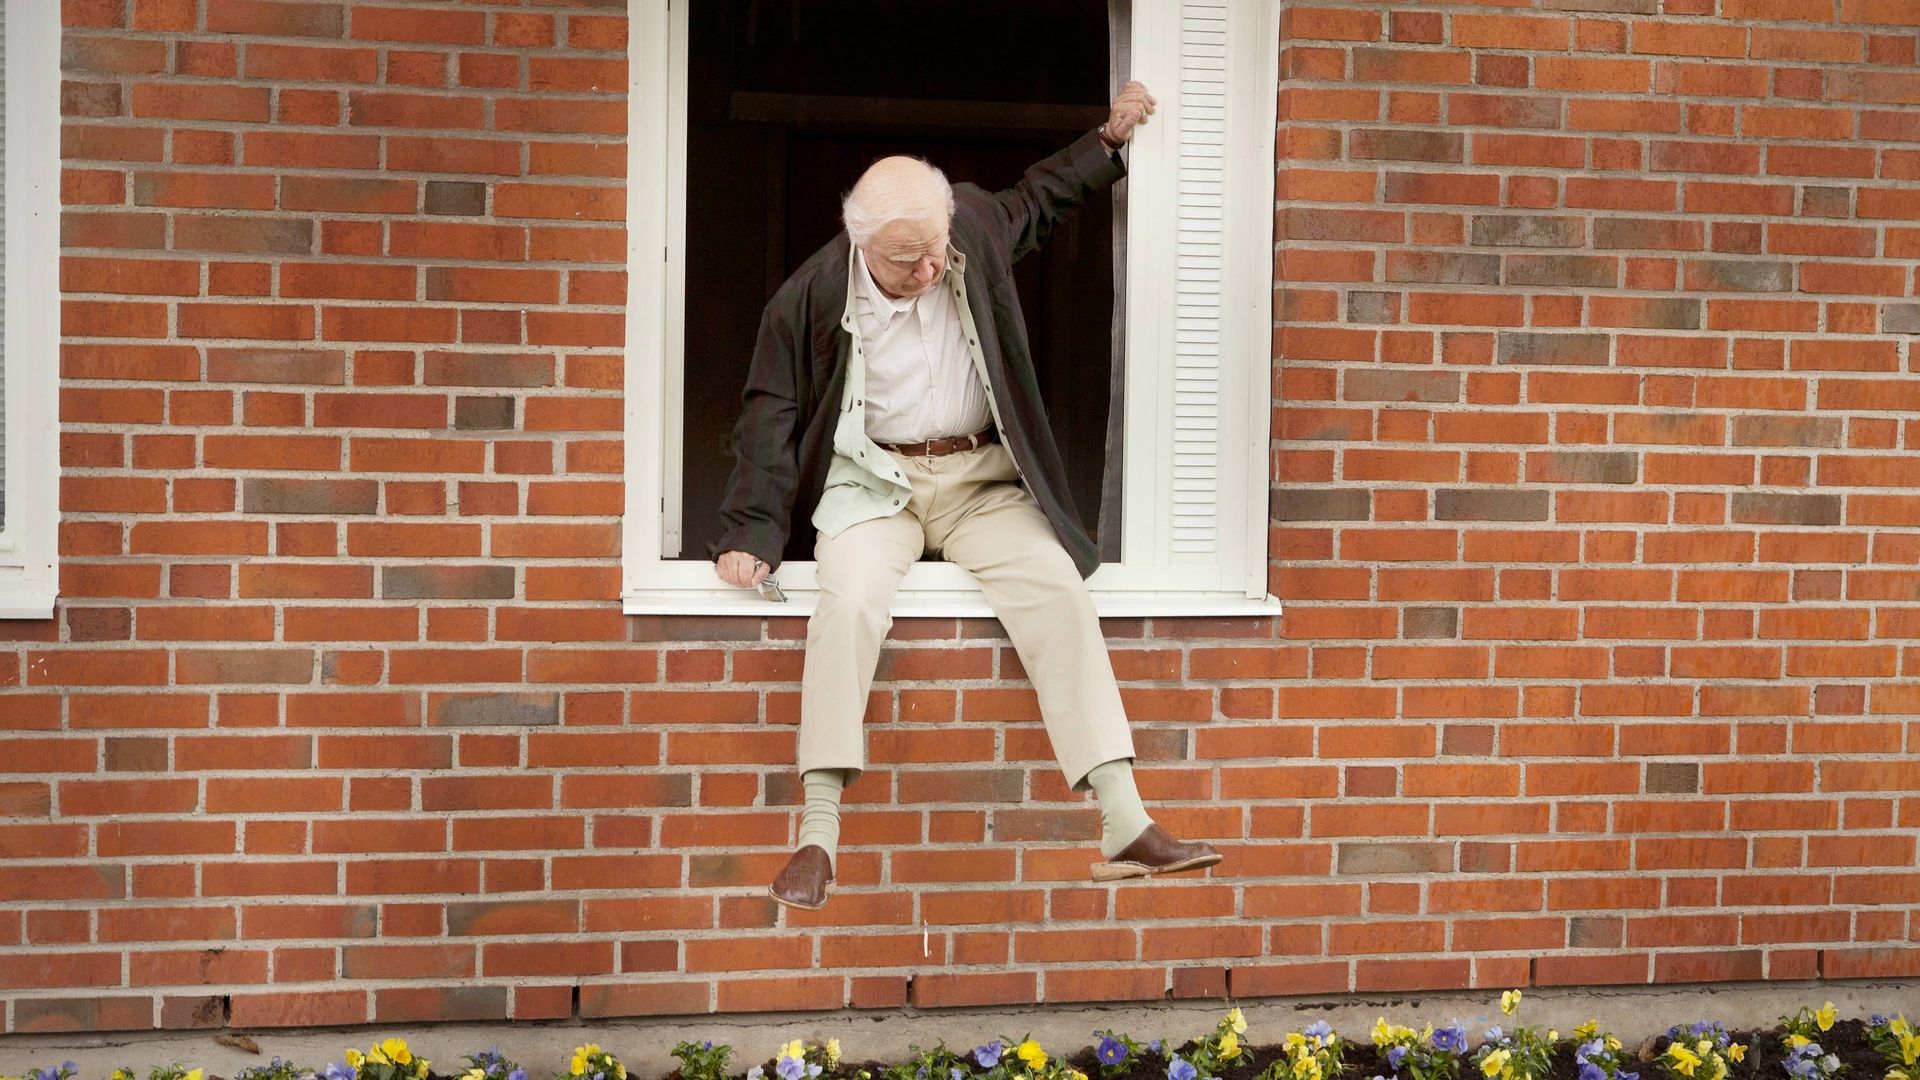 The 100-Year-Old Man Who Climbed Out the Window and Disappeared (DVD, 2013)  for sale online